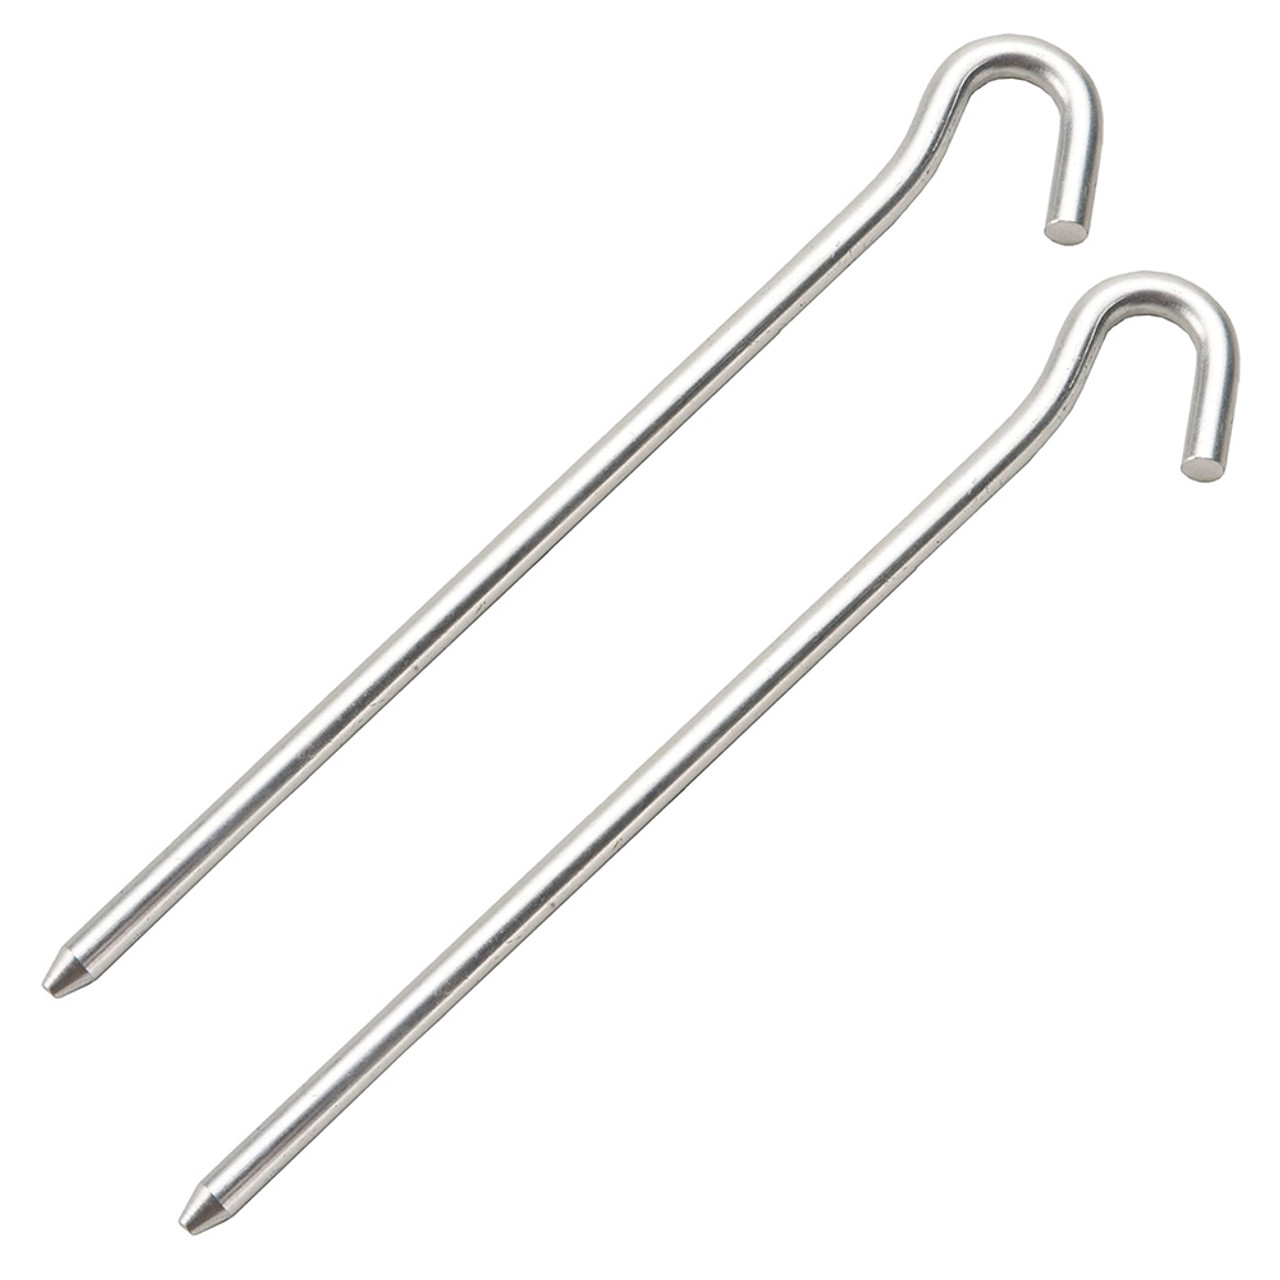 Two 7 in. Aluminum Tent Pegs